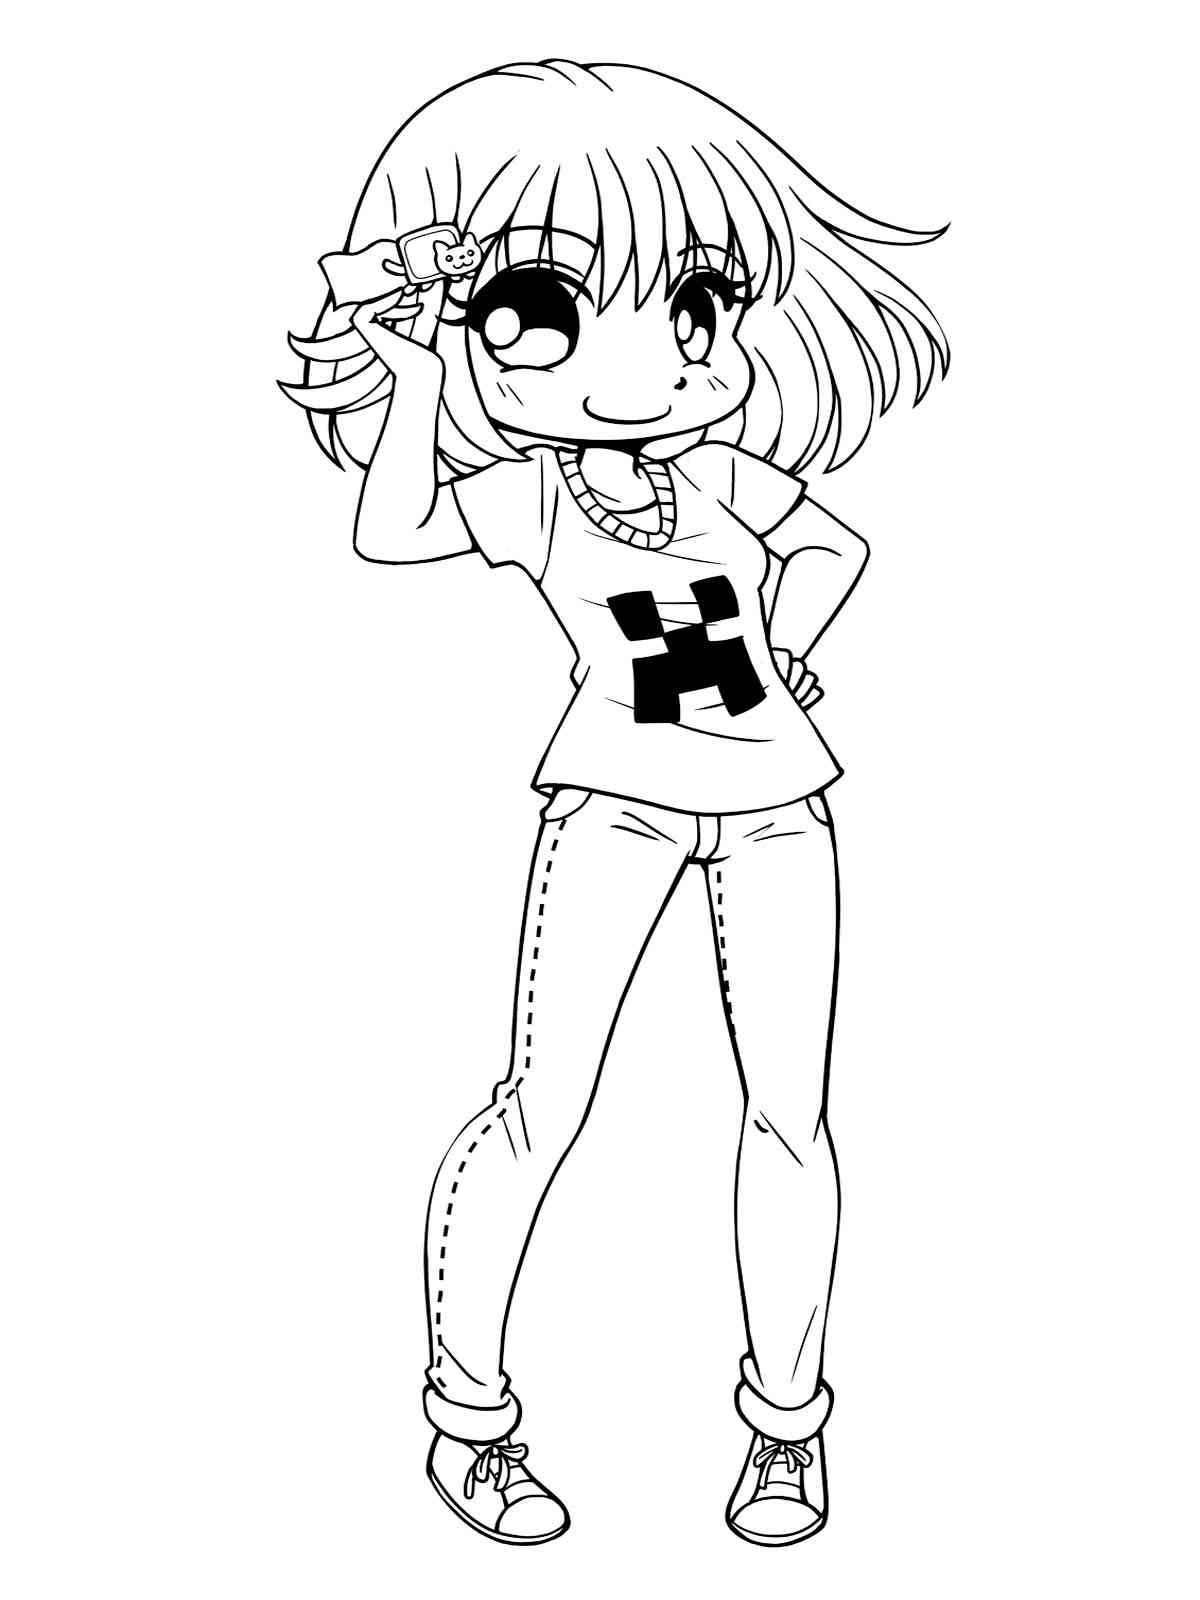 Anime Girl 48 coloring page